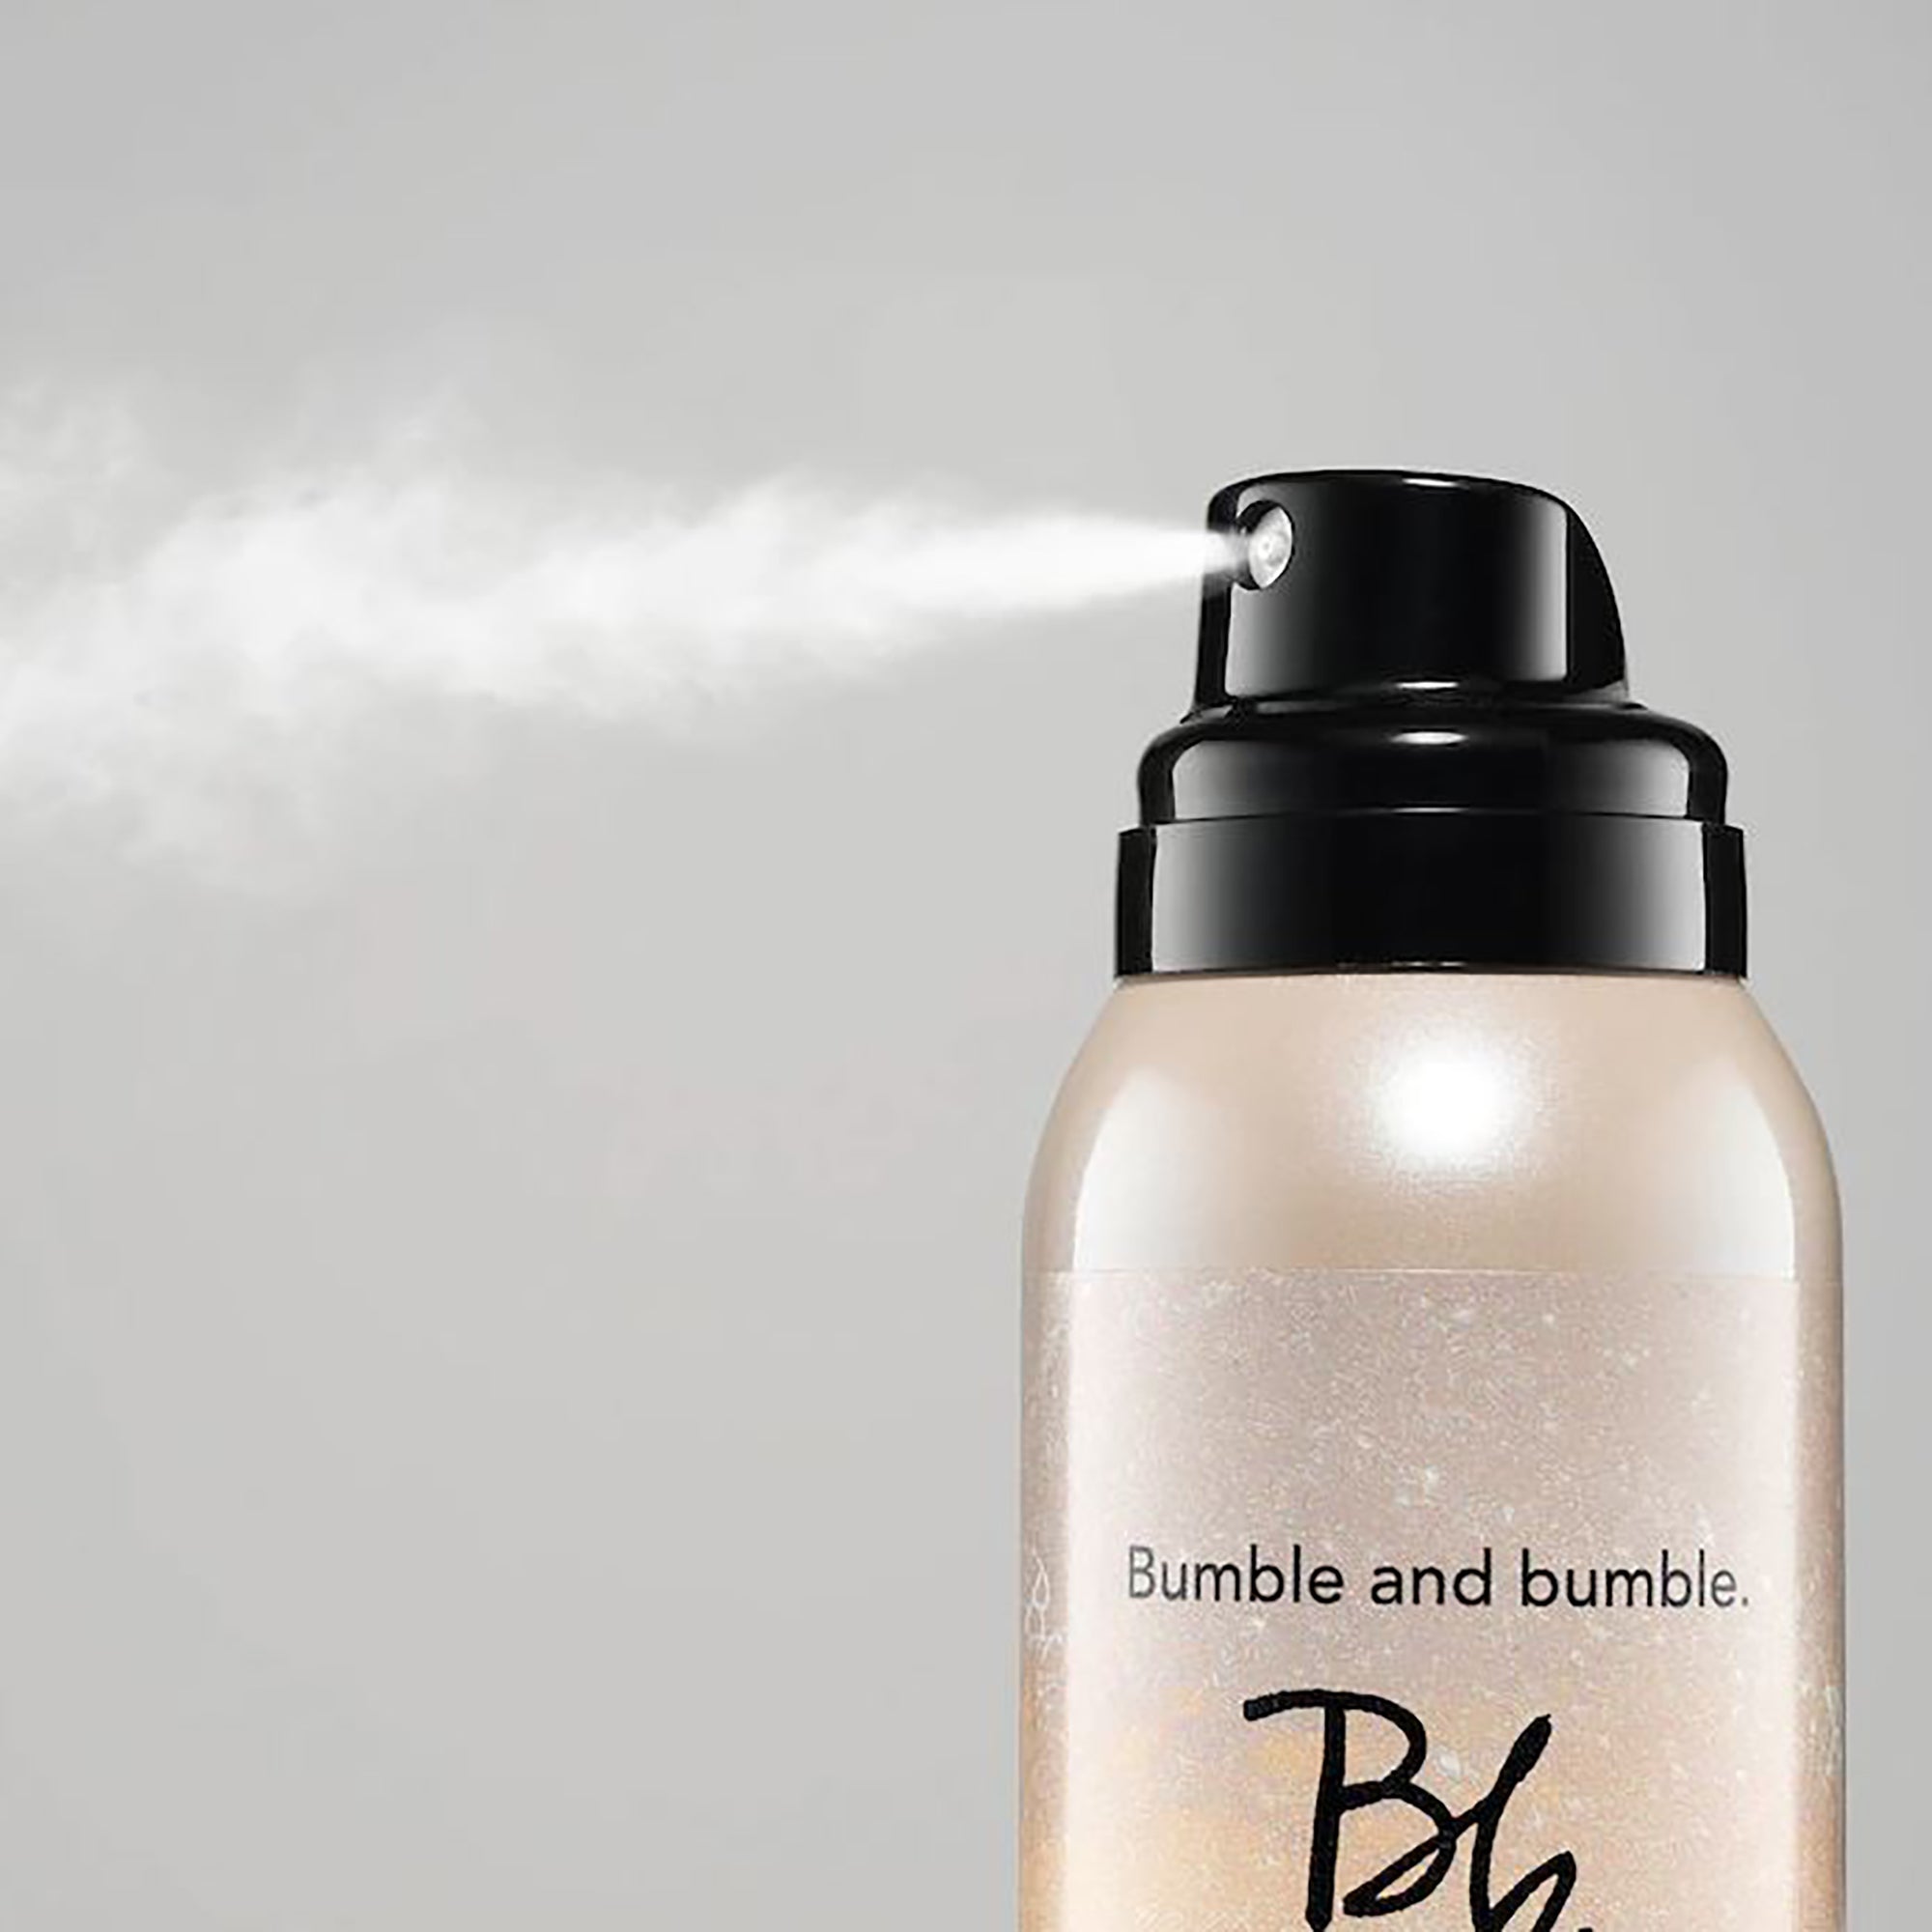 Bumble and bumble Pret-a-Powder Tres Invisible Dry Shampoo / 7.5OZ